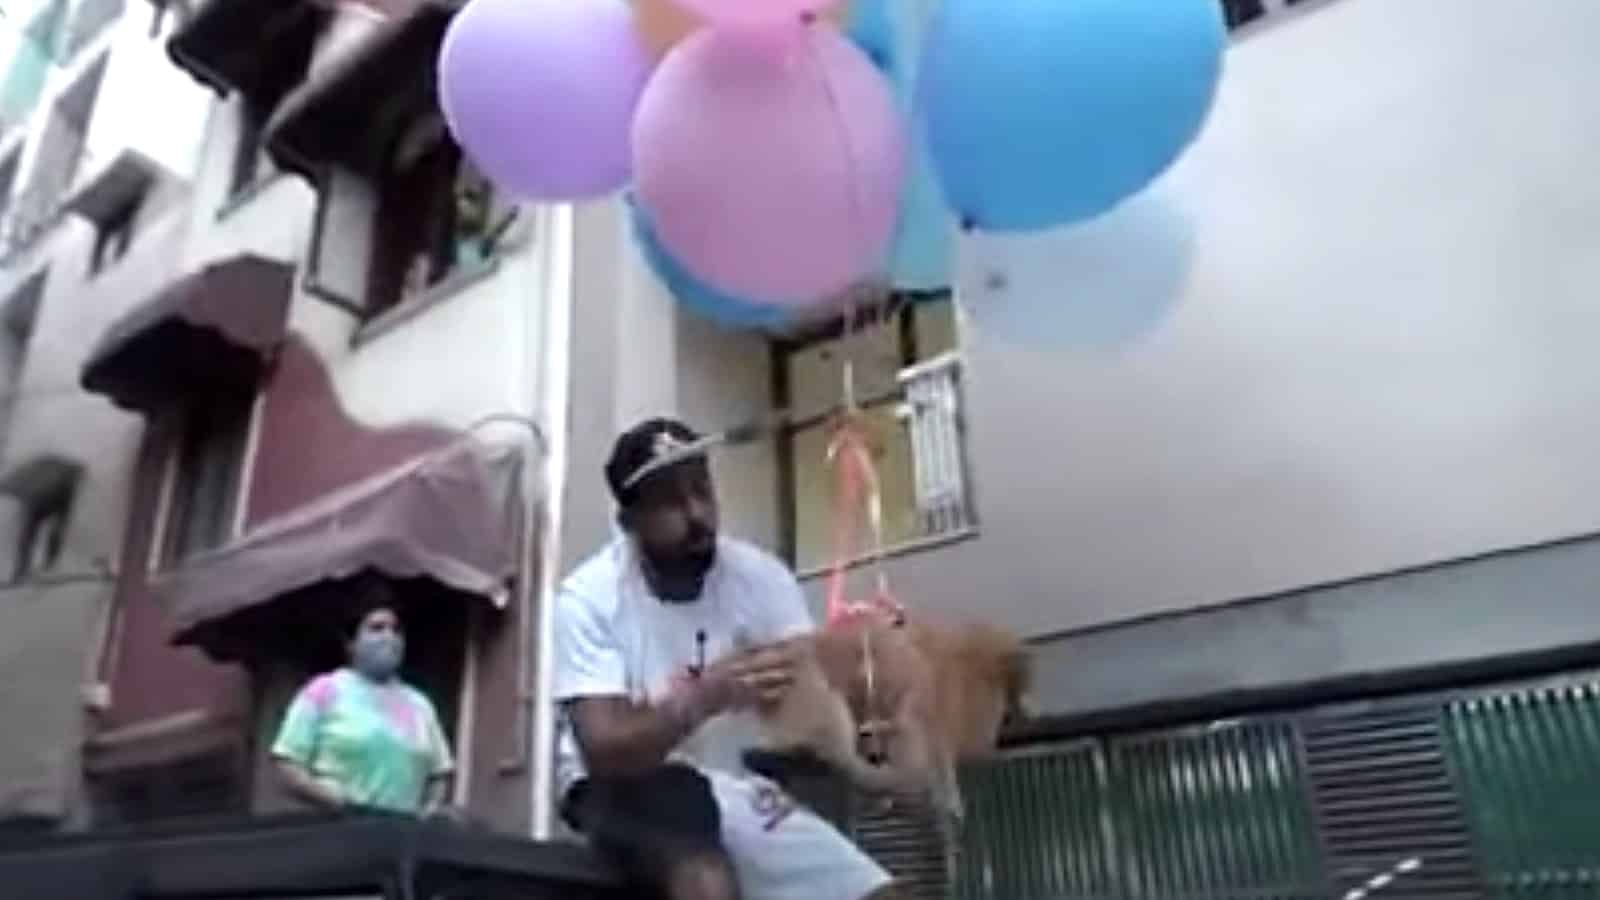 YouTuber ties balloons to dog to make it fly